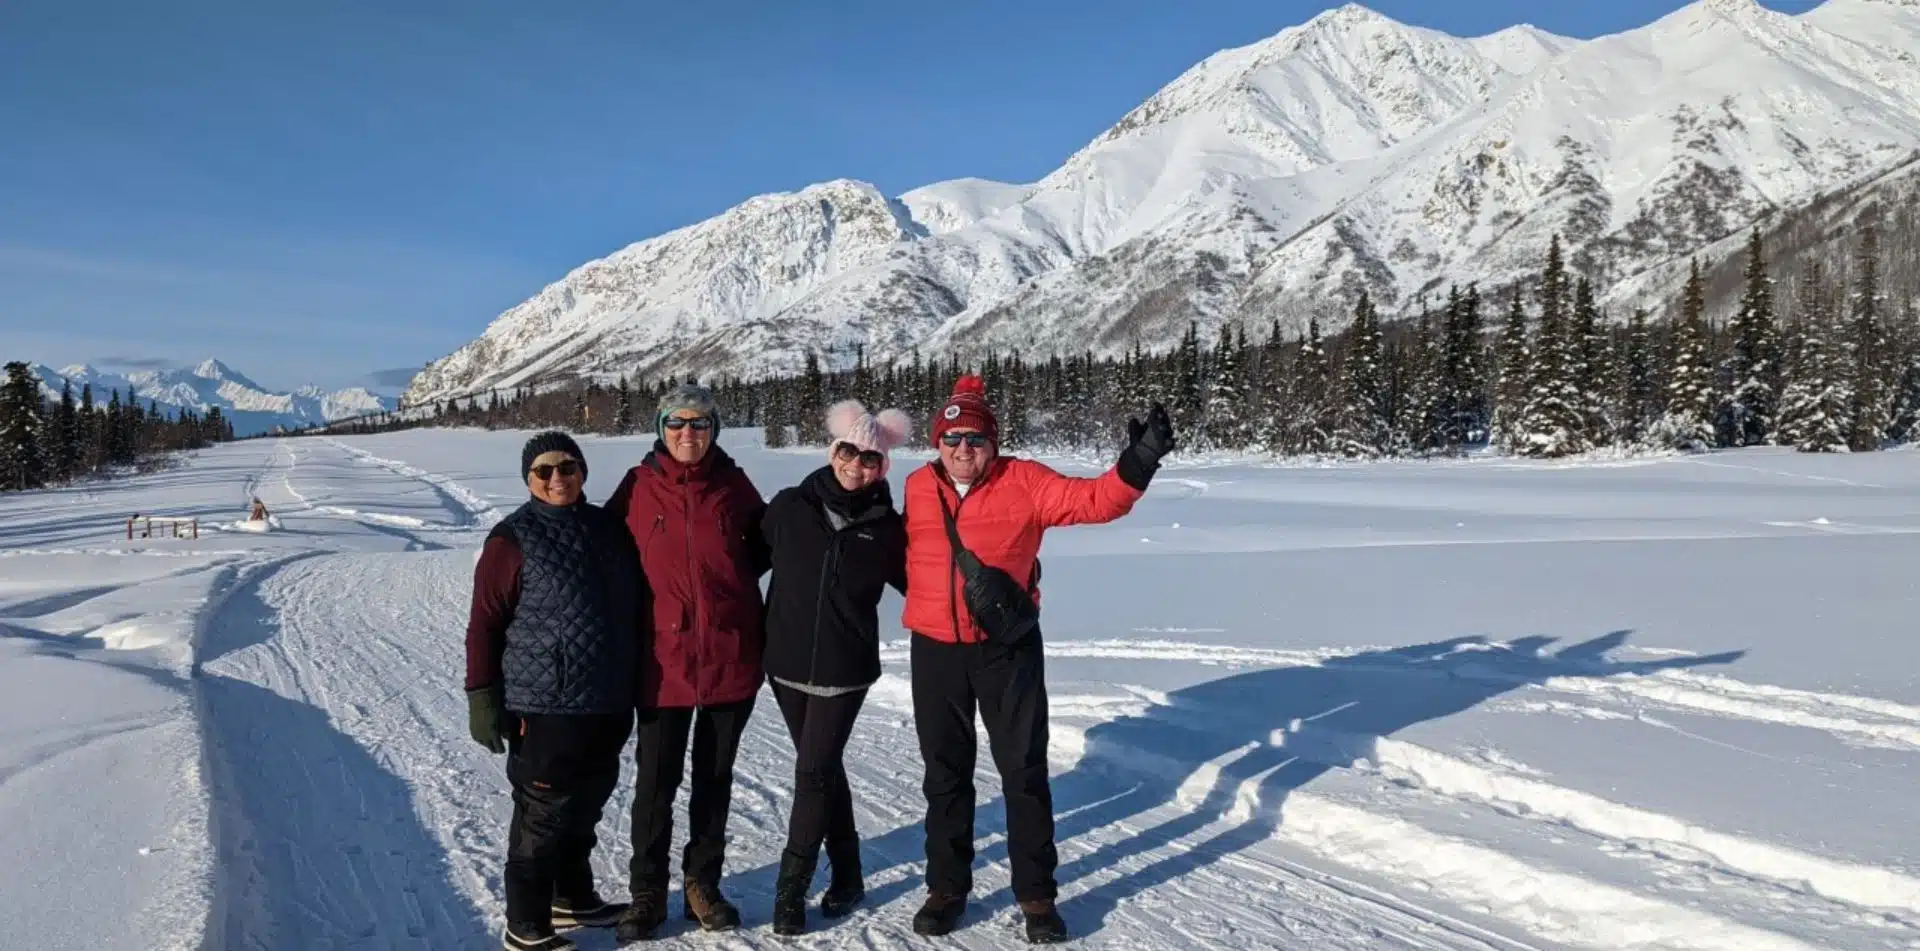 Classic Journeys guests enjoying themselves on tour in Alaska